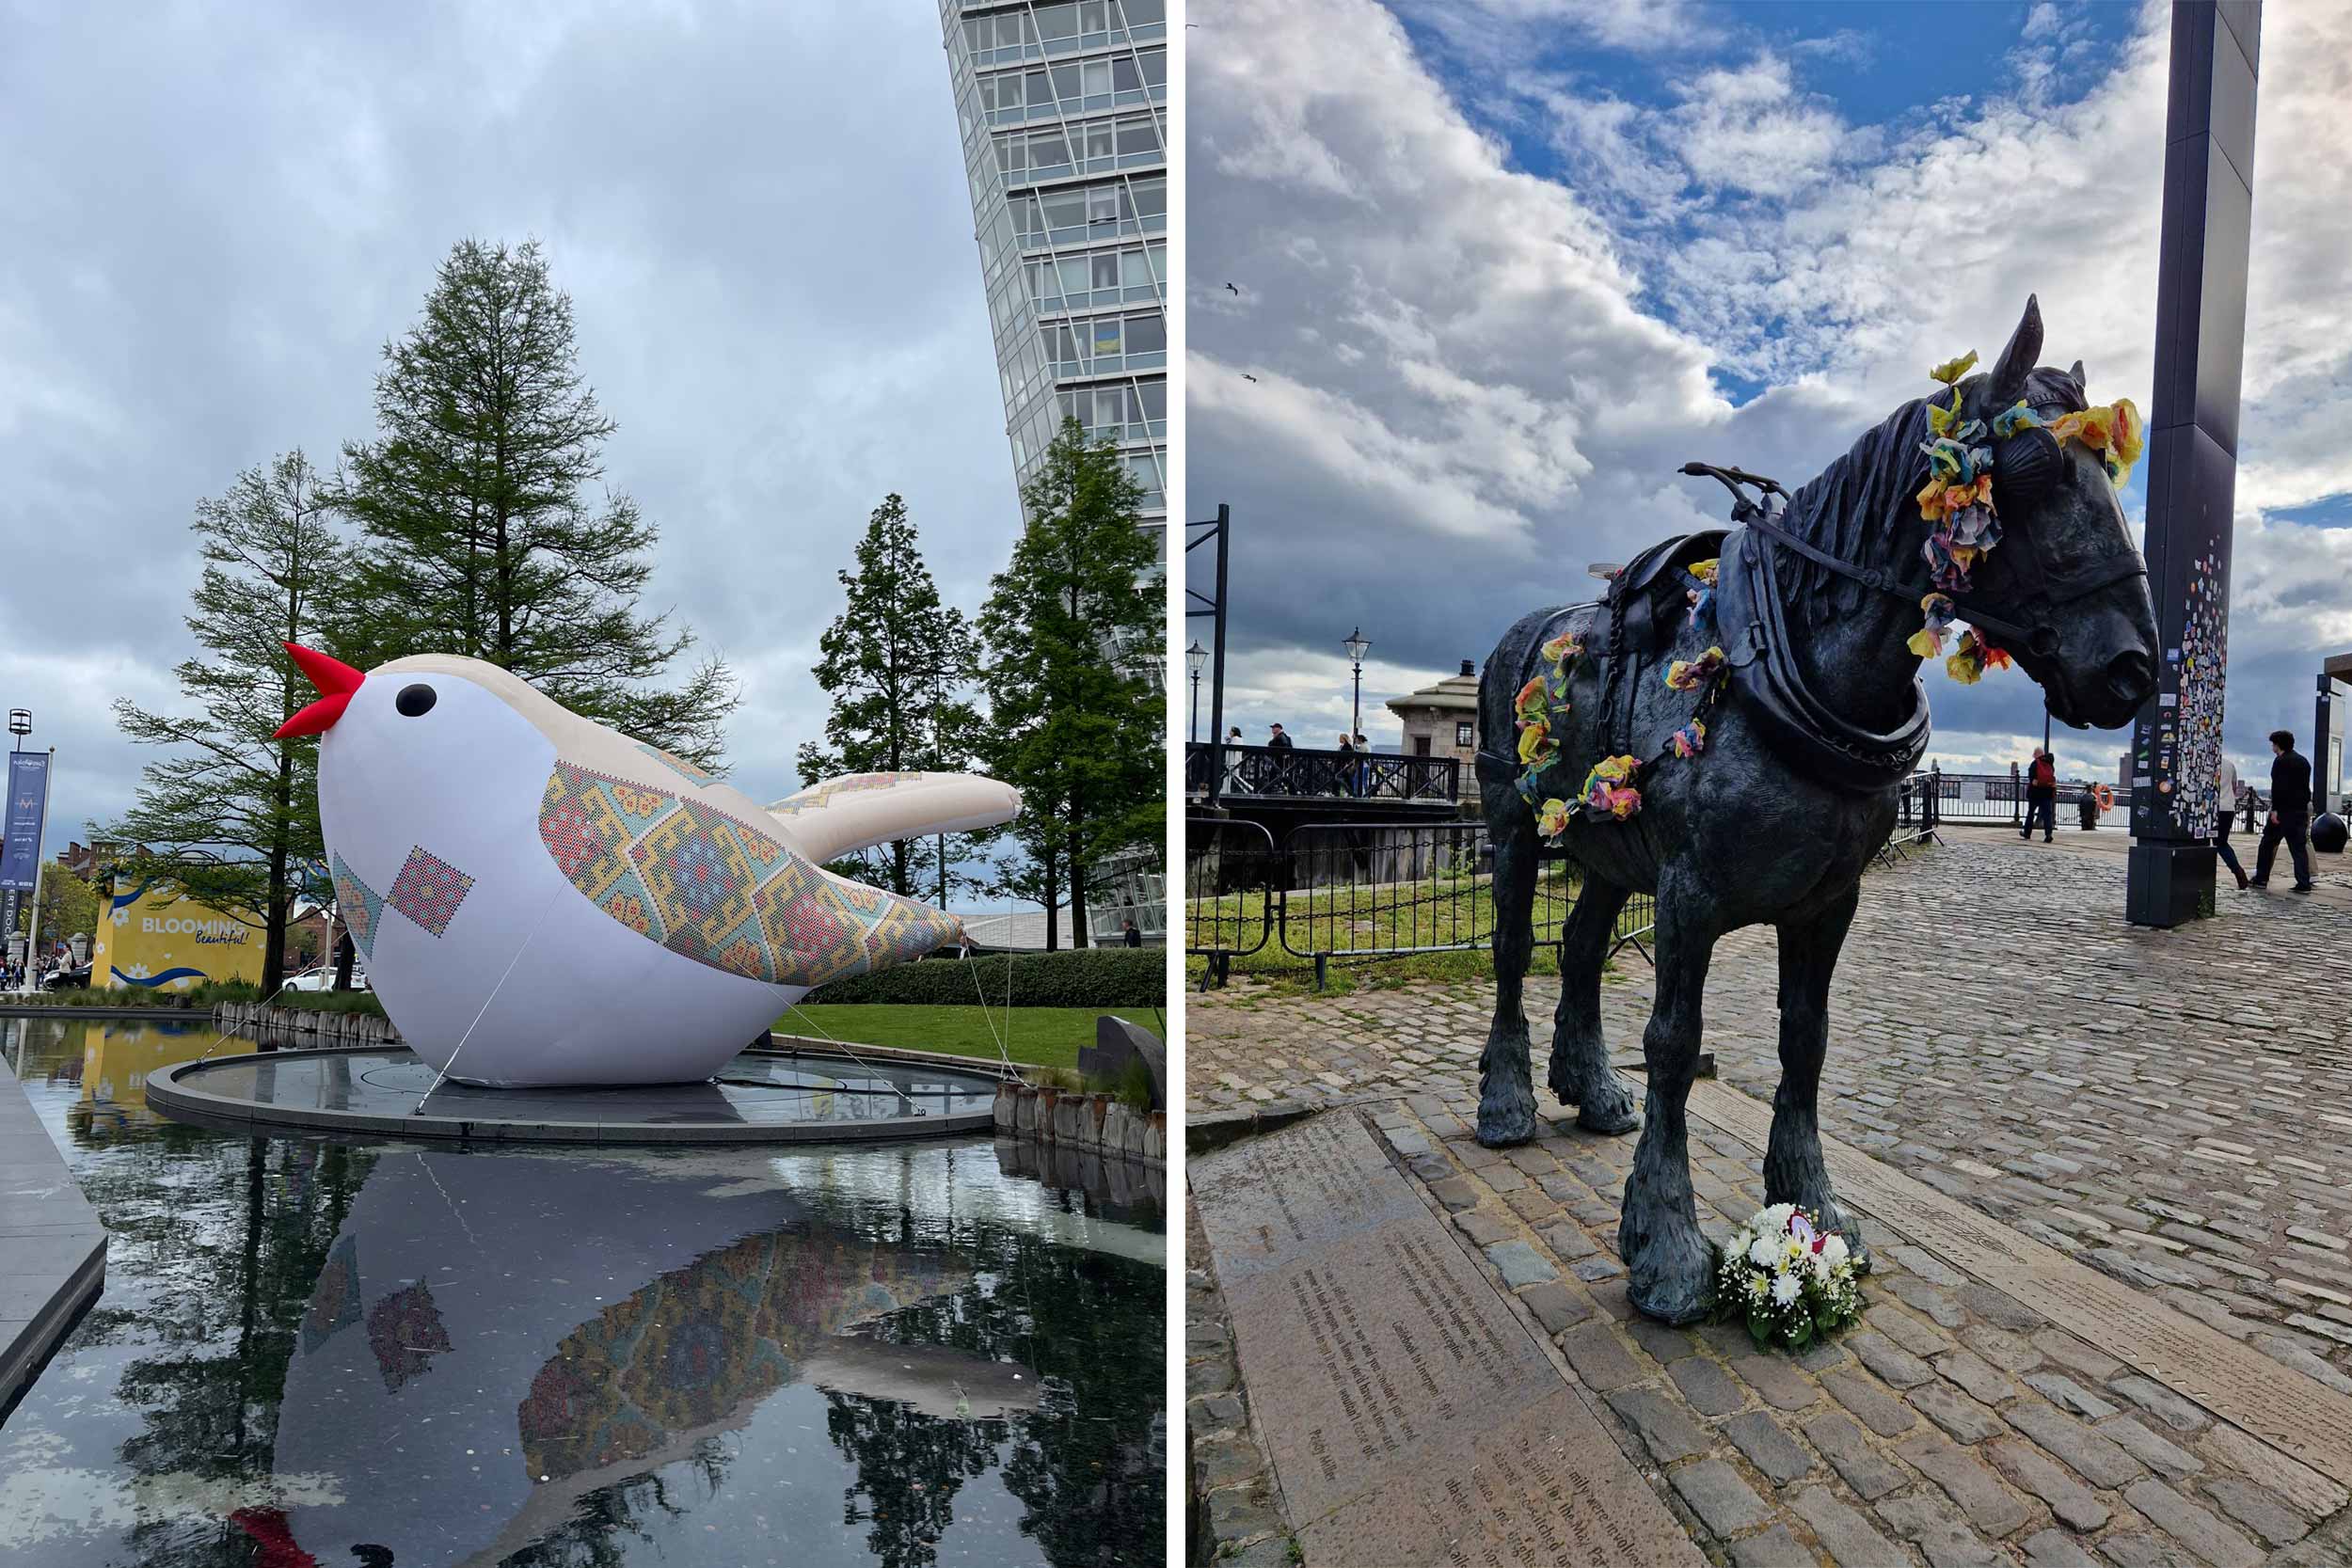 (left) The soloveiko, meaning nightingale in Ukrainian, is Ukraine's national bird and it represents songs and happiness. Twelve soloveiko from different regions of Ukraine travelled to Liverpool to represent the country's songs and stories to the 2023 Eurovision song contest. © Anna Kovalska (right) In Liverpool a statue of a horse was decorated with traditional Ukrainian flowers. © Anatoliy Dobrovolskiy